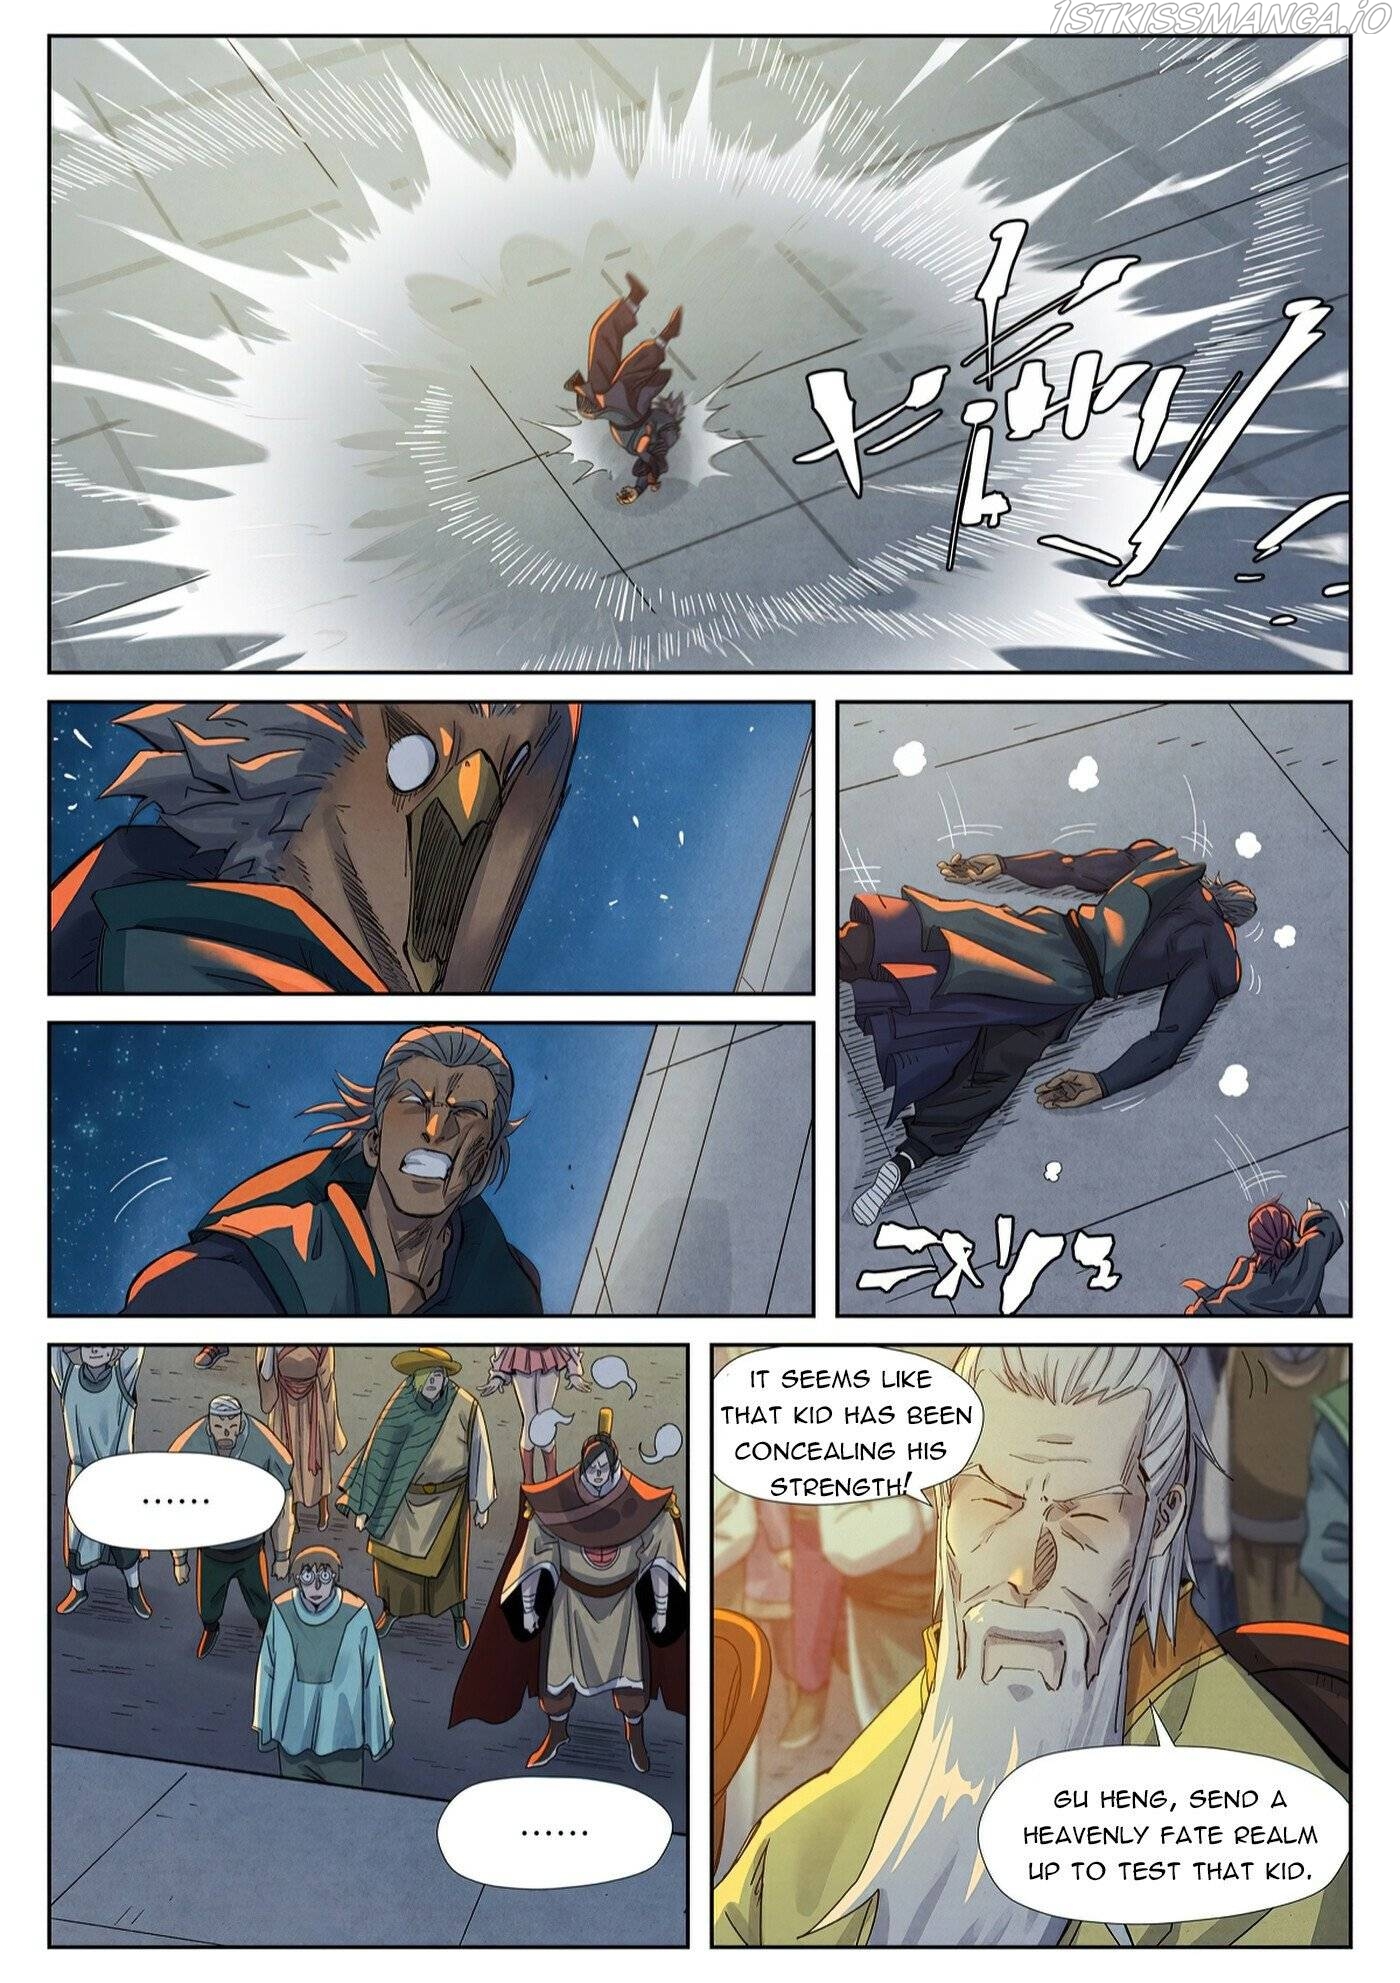 Tales of Demons and Gods Manhua Chapter 349.5 - Page 3